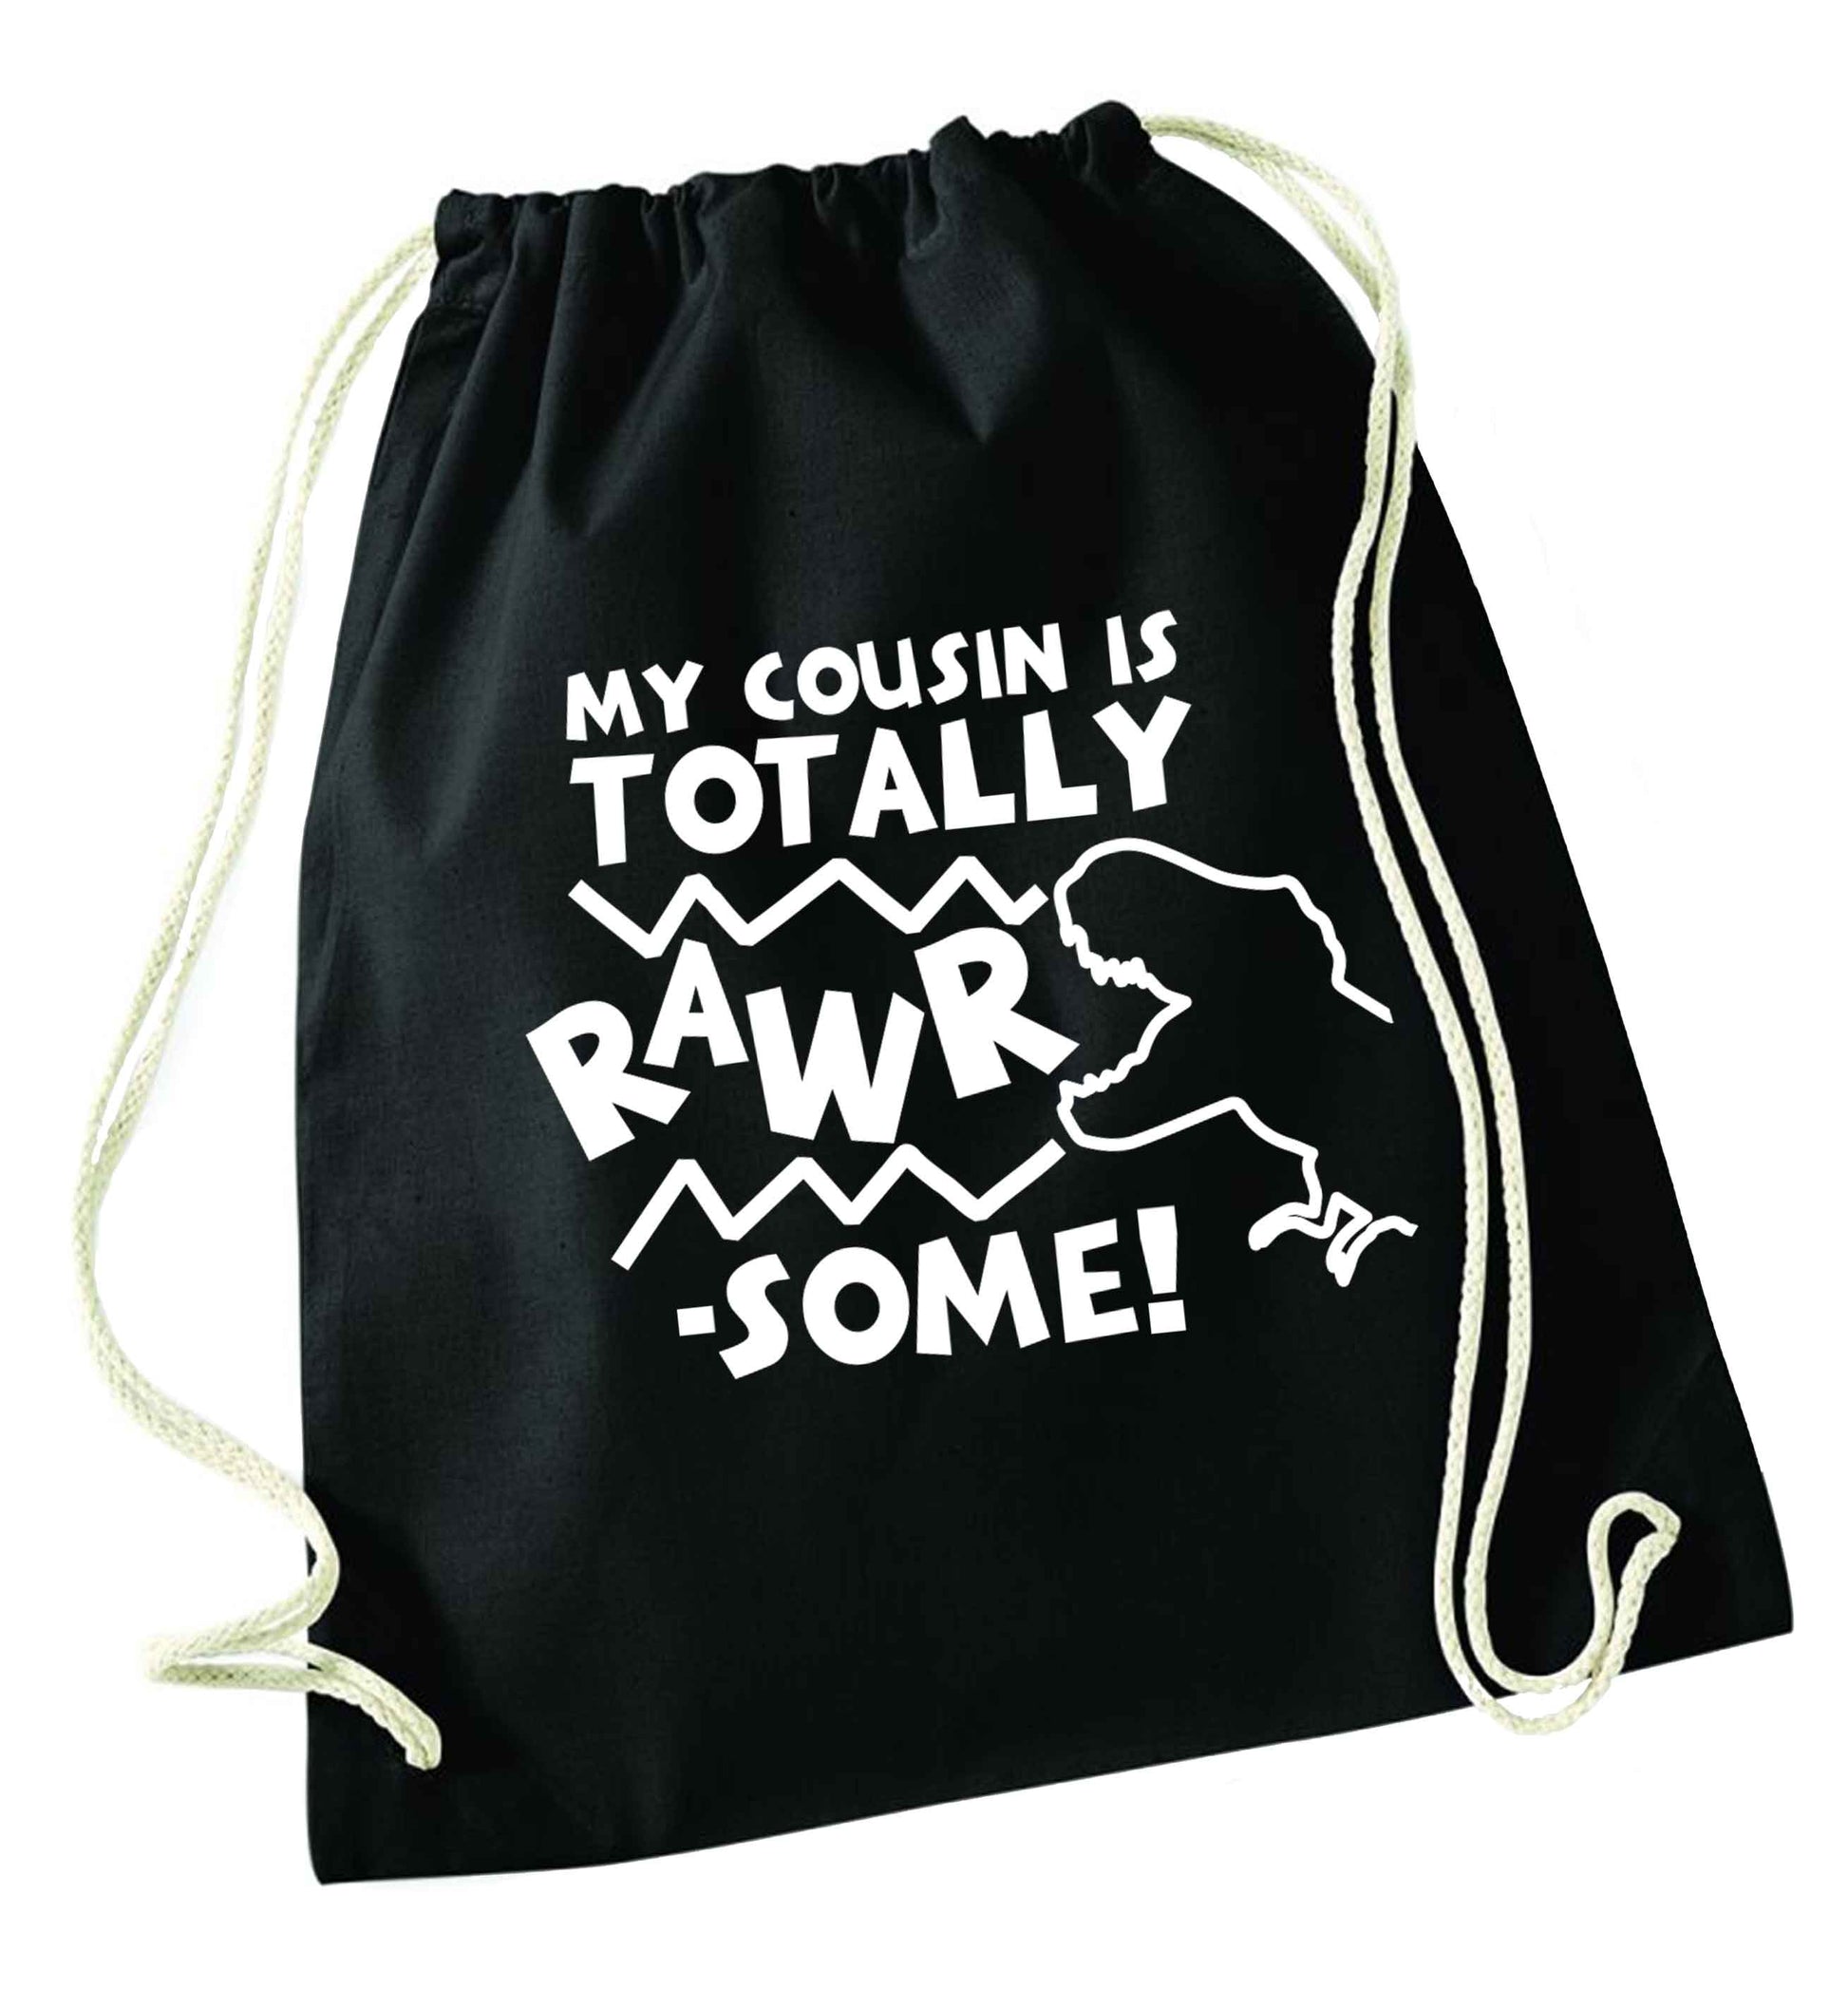 My cousin is totally rawrsome black drawstring bag